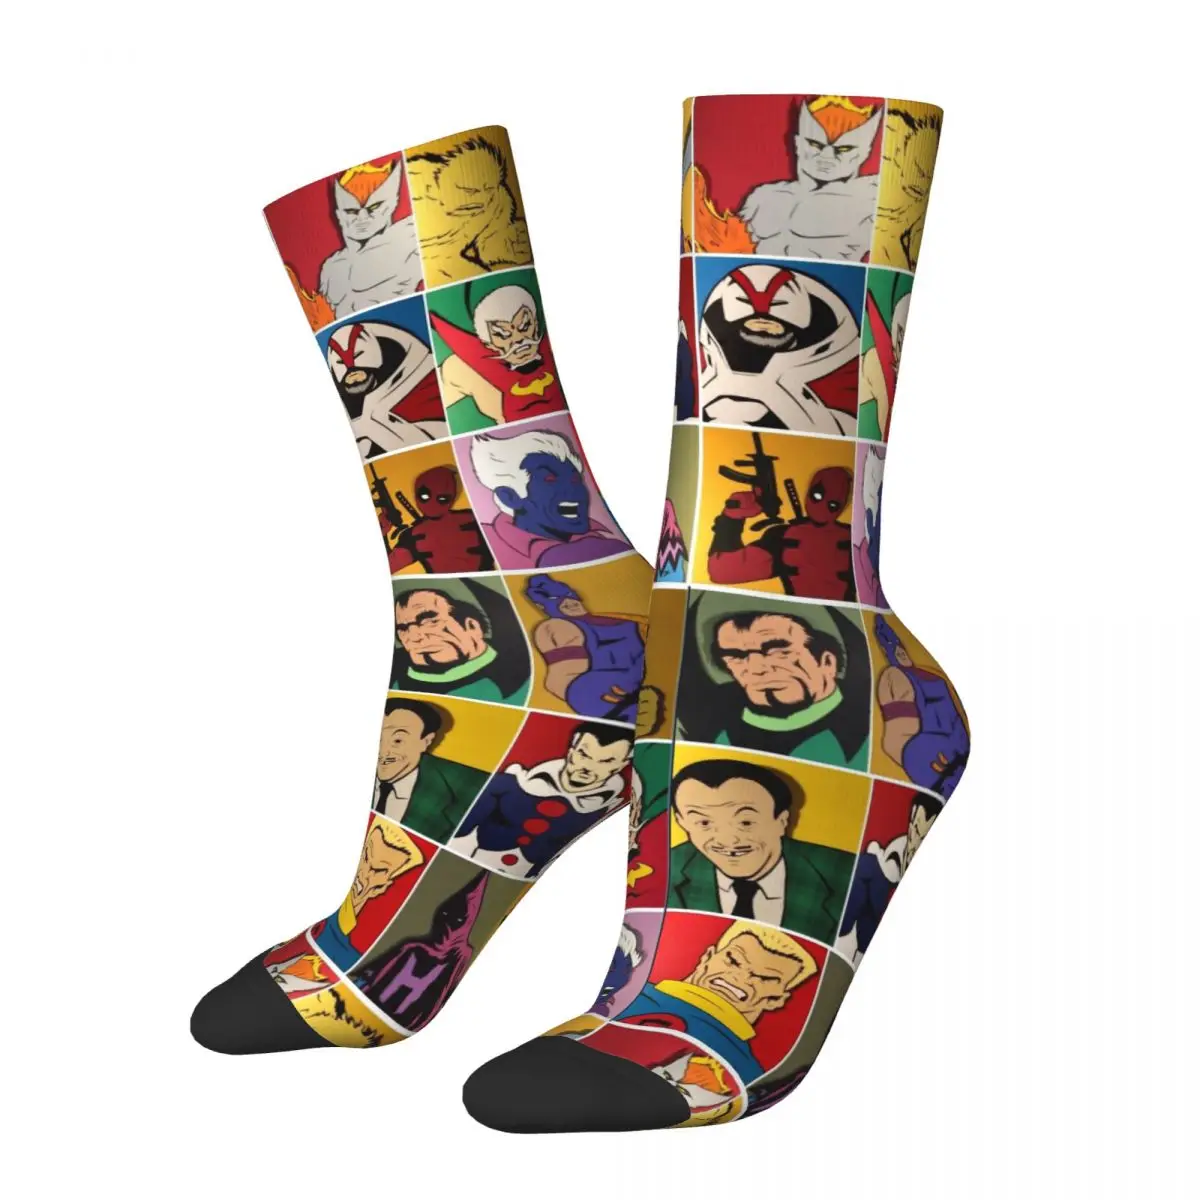 Friends He-Man The Master Of The Universe cosy Unisex Socks Cycling Interesting Four Seasons Socks luckymarche line friends edition lucky marche brown color line socks qnlax23111brx